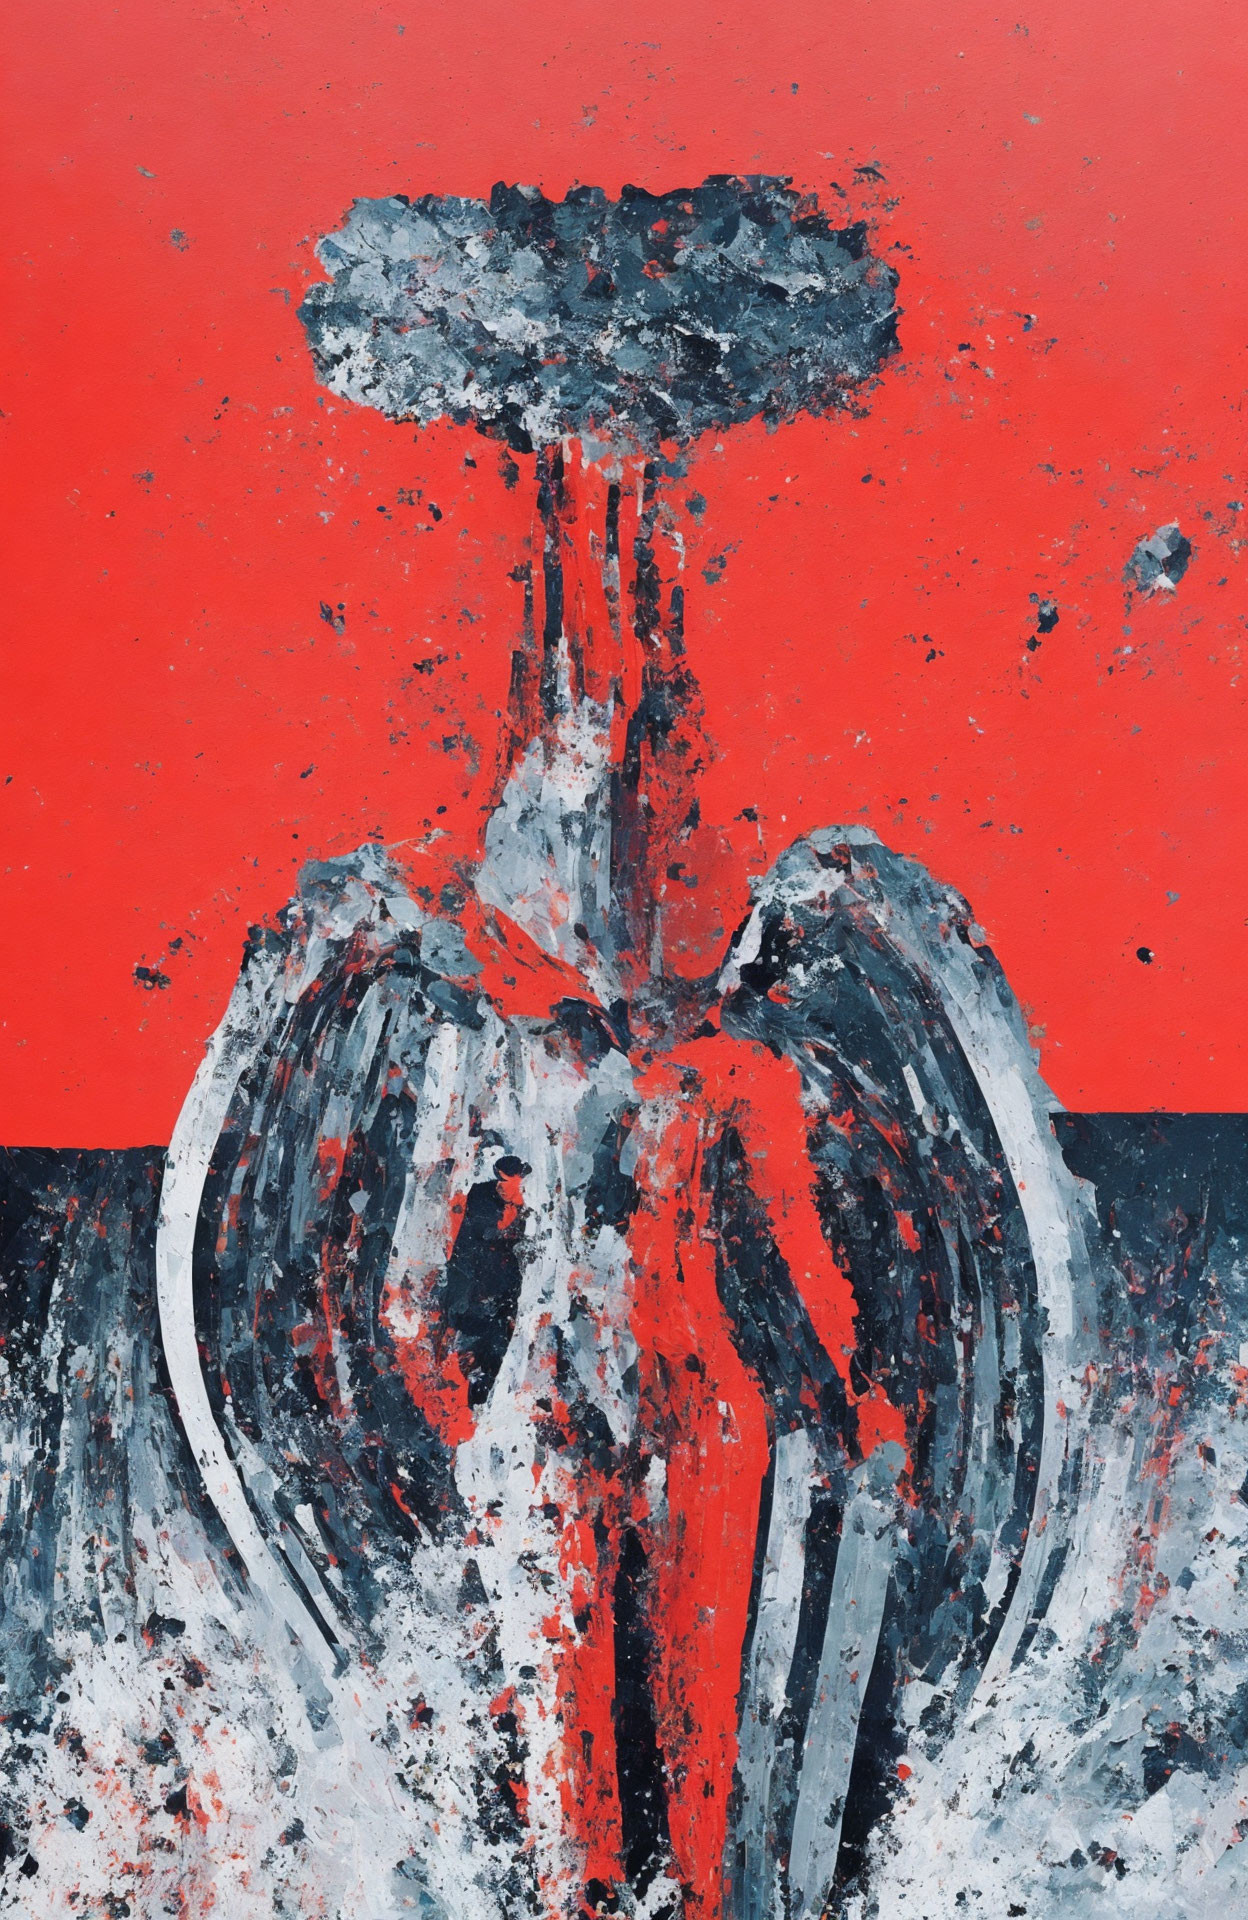 Abstract painting: Dark figure in explosive or floral form on red and black background.